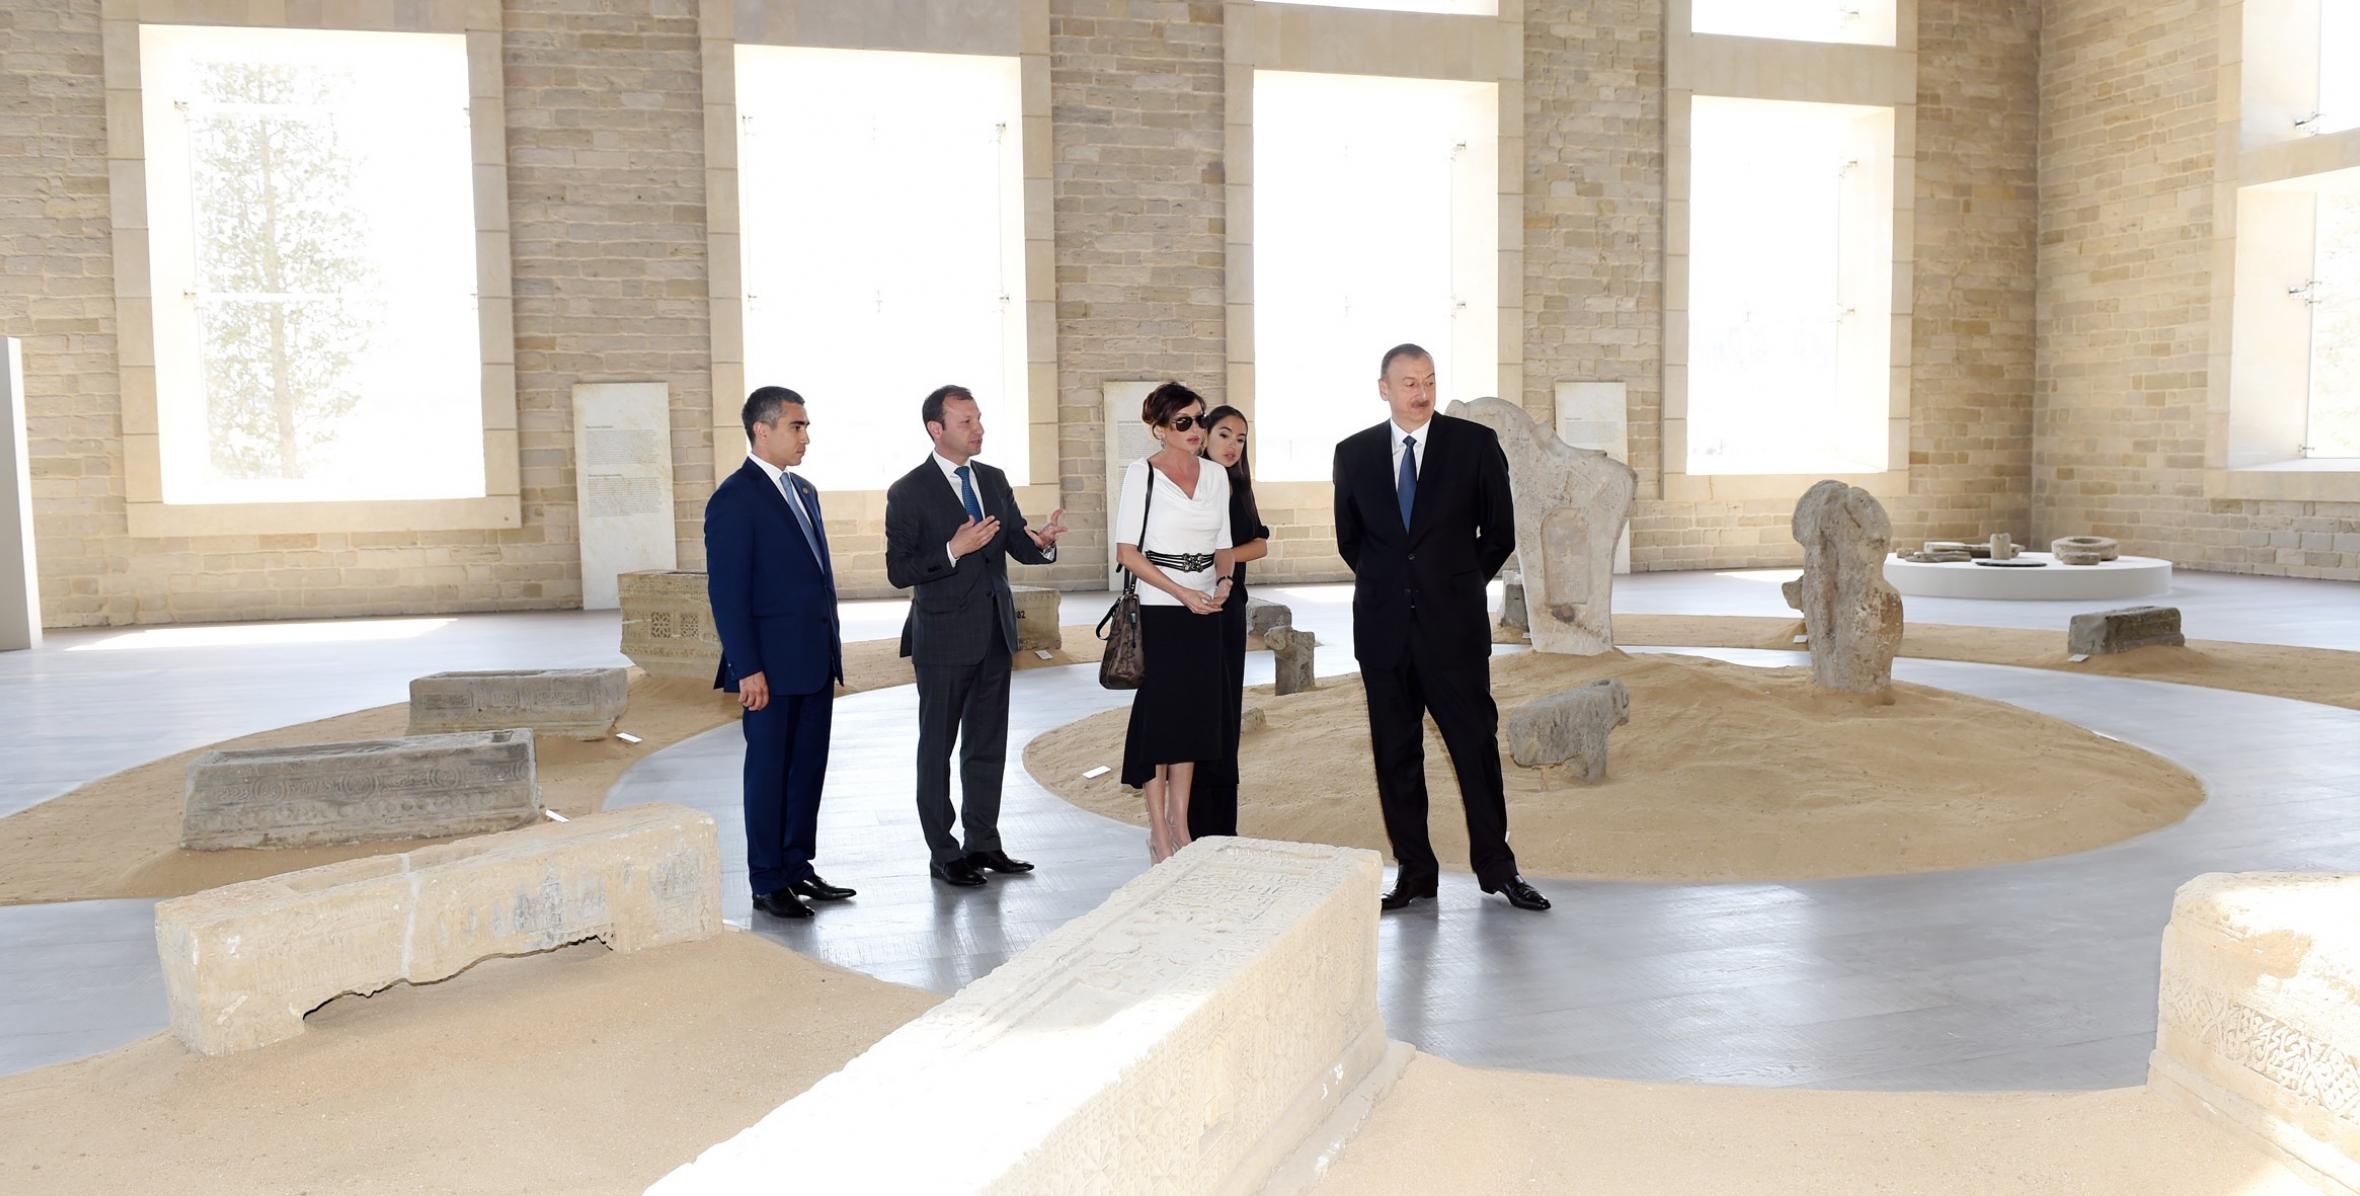 Ilham Aliyev reviewed Stone Annals Museum in National Flag Square